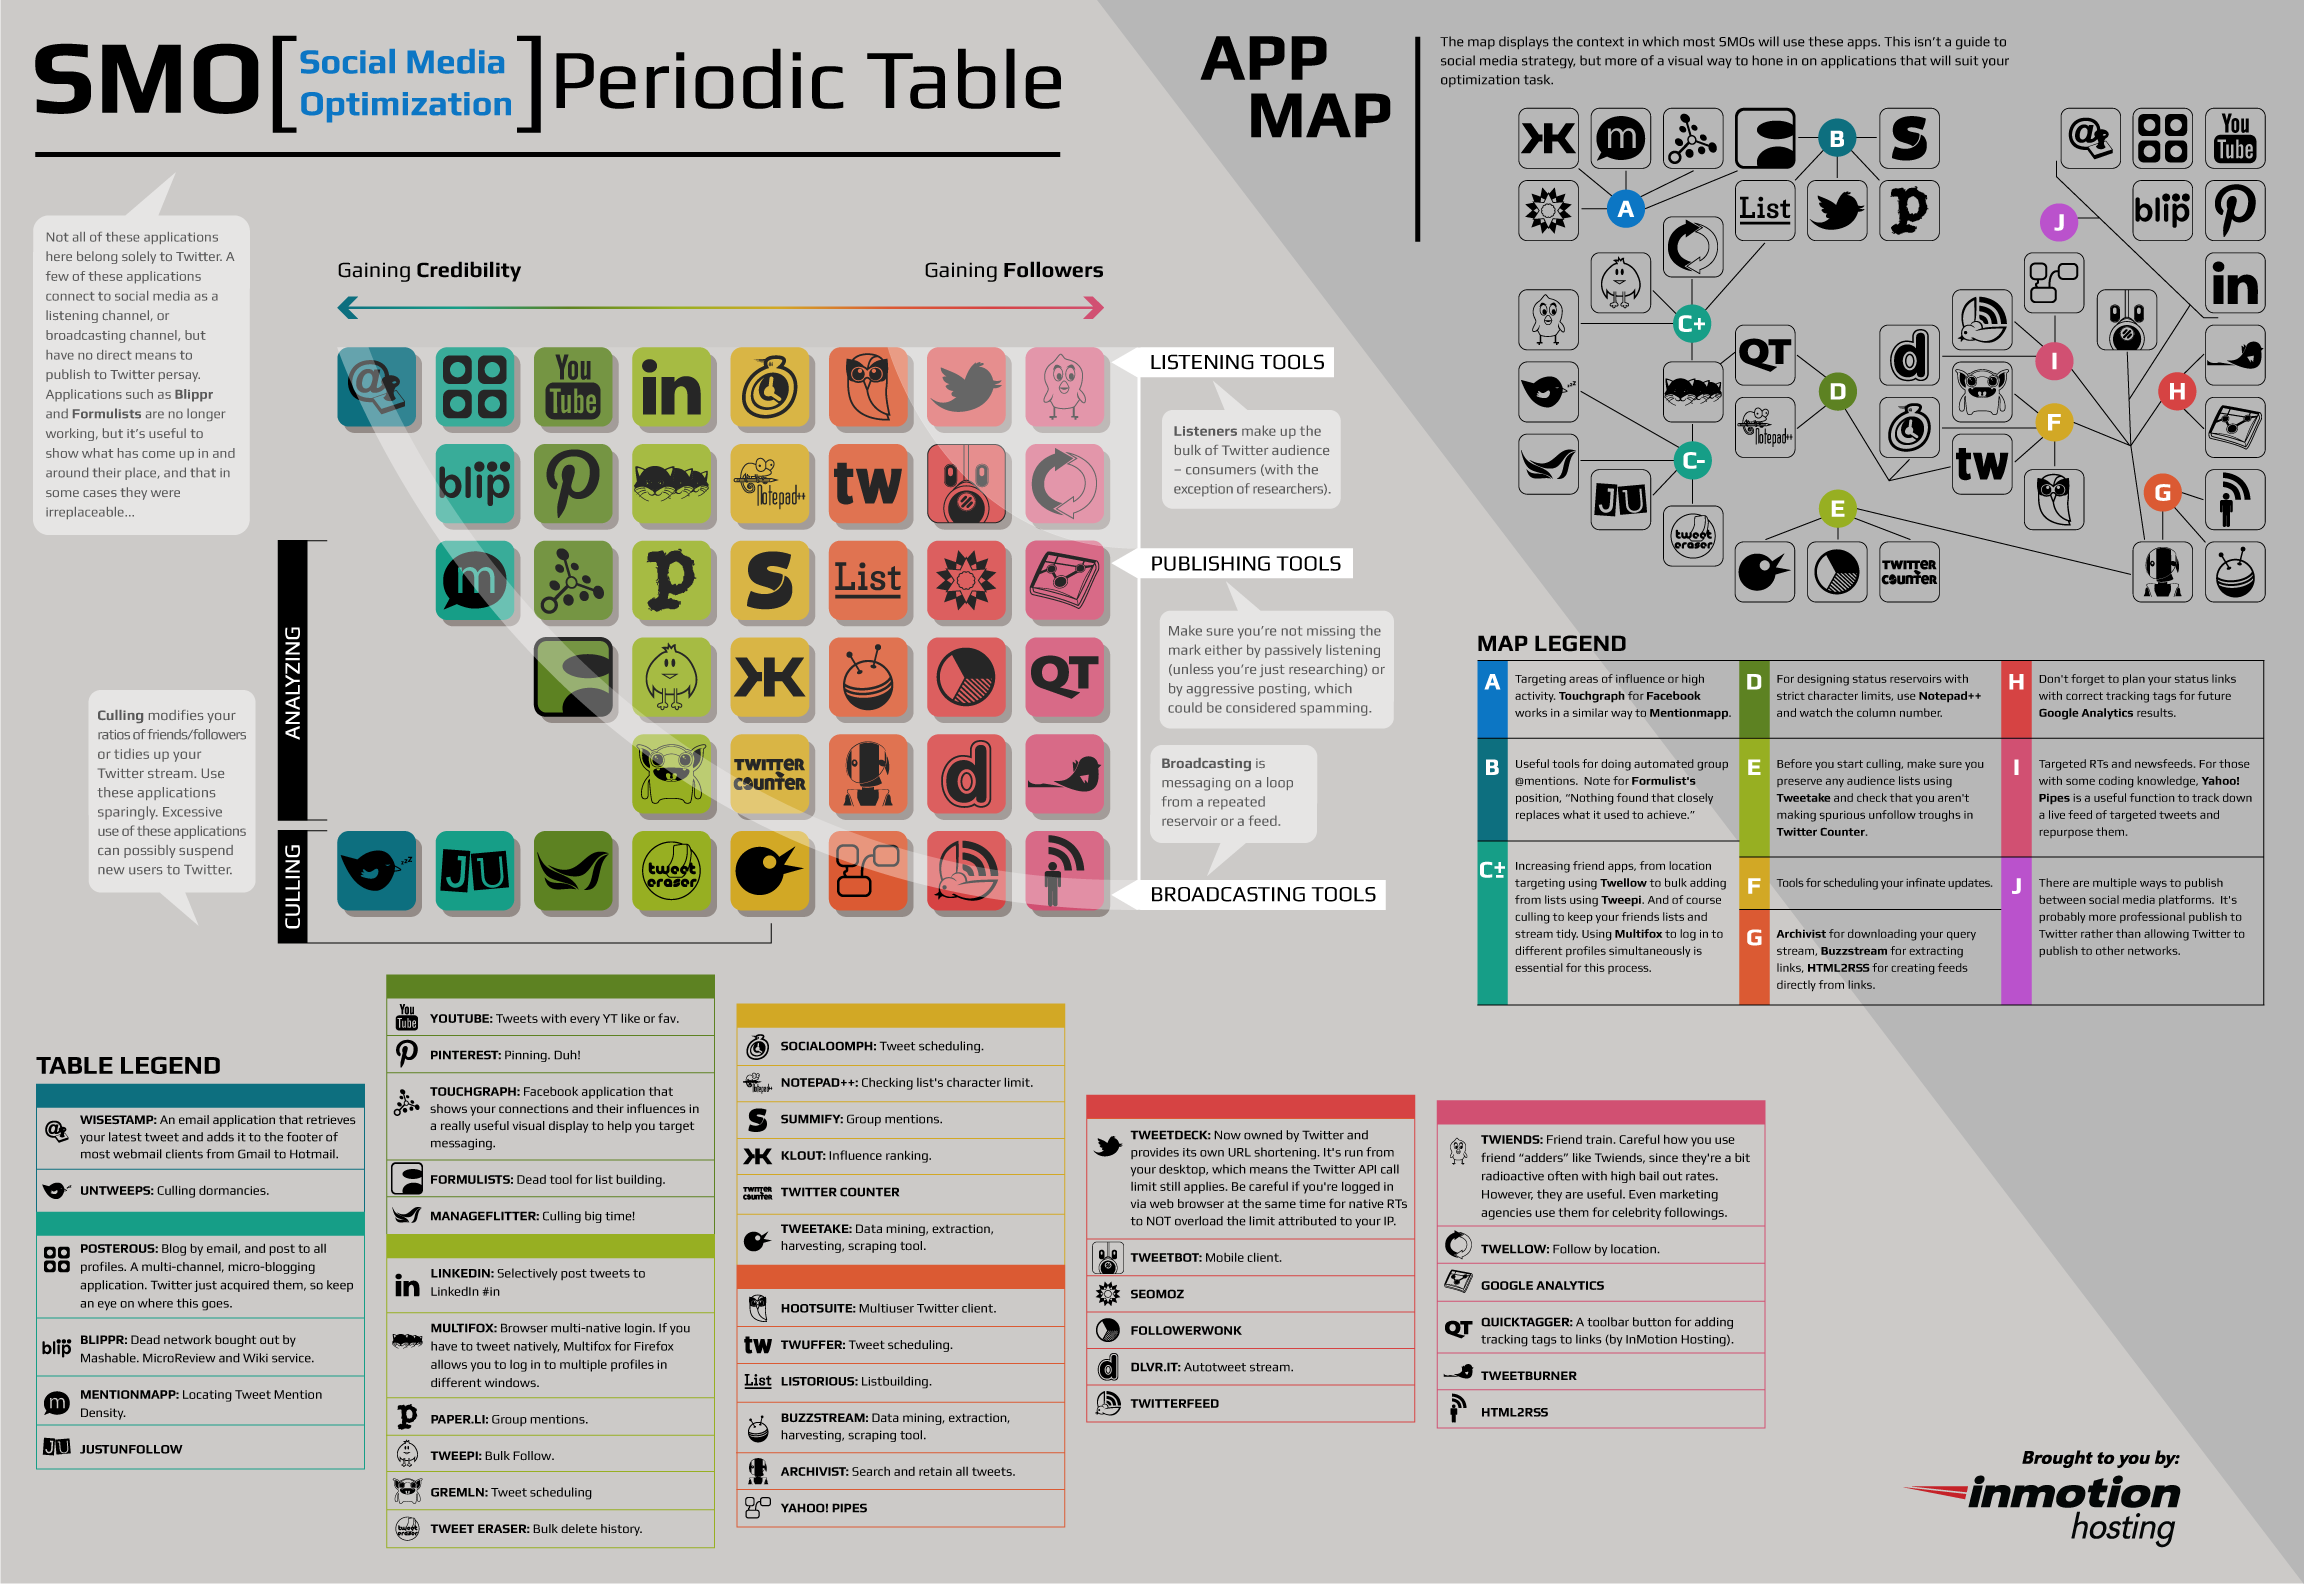 SMO Periodic Table and App Map